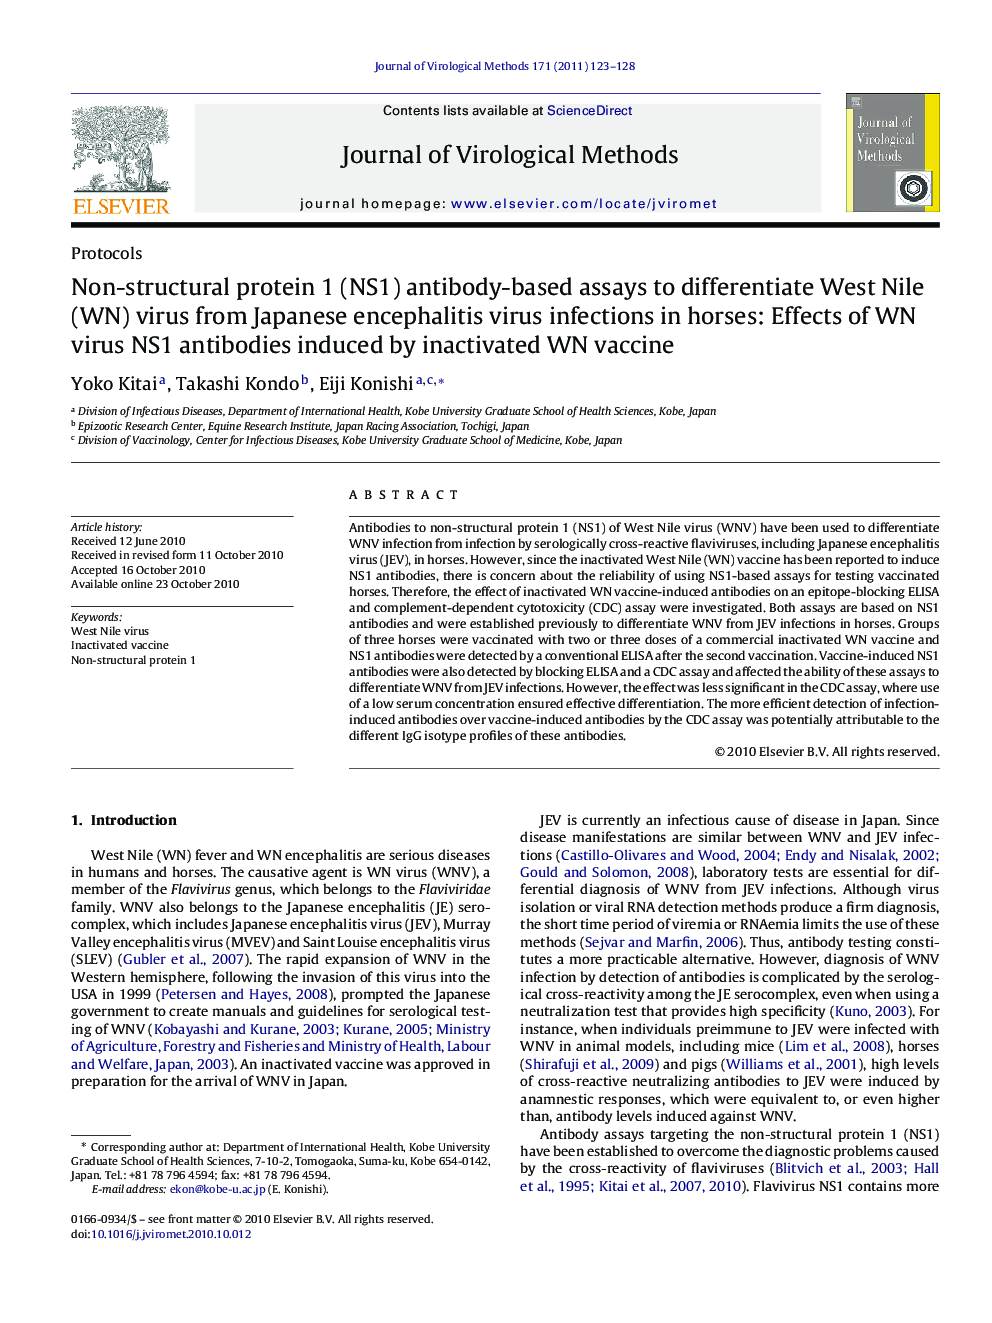 Non-structural protein 1 (NS1) antibody-based assays to differentiate West Nile (WN) virus from Japanese encephalitis virus infections in horses: Effects of WN virus NS1 antibodies induced by inactivated WN vaccine